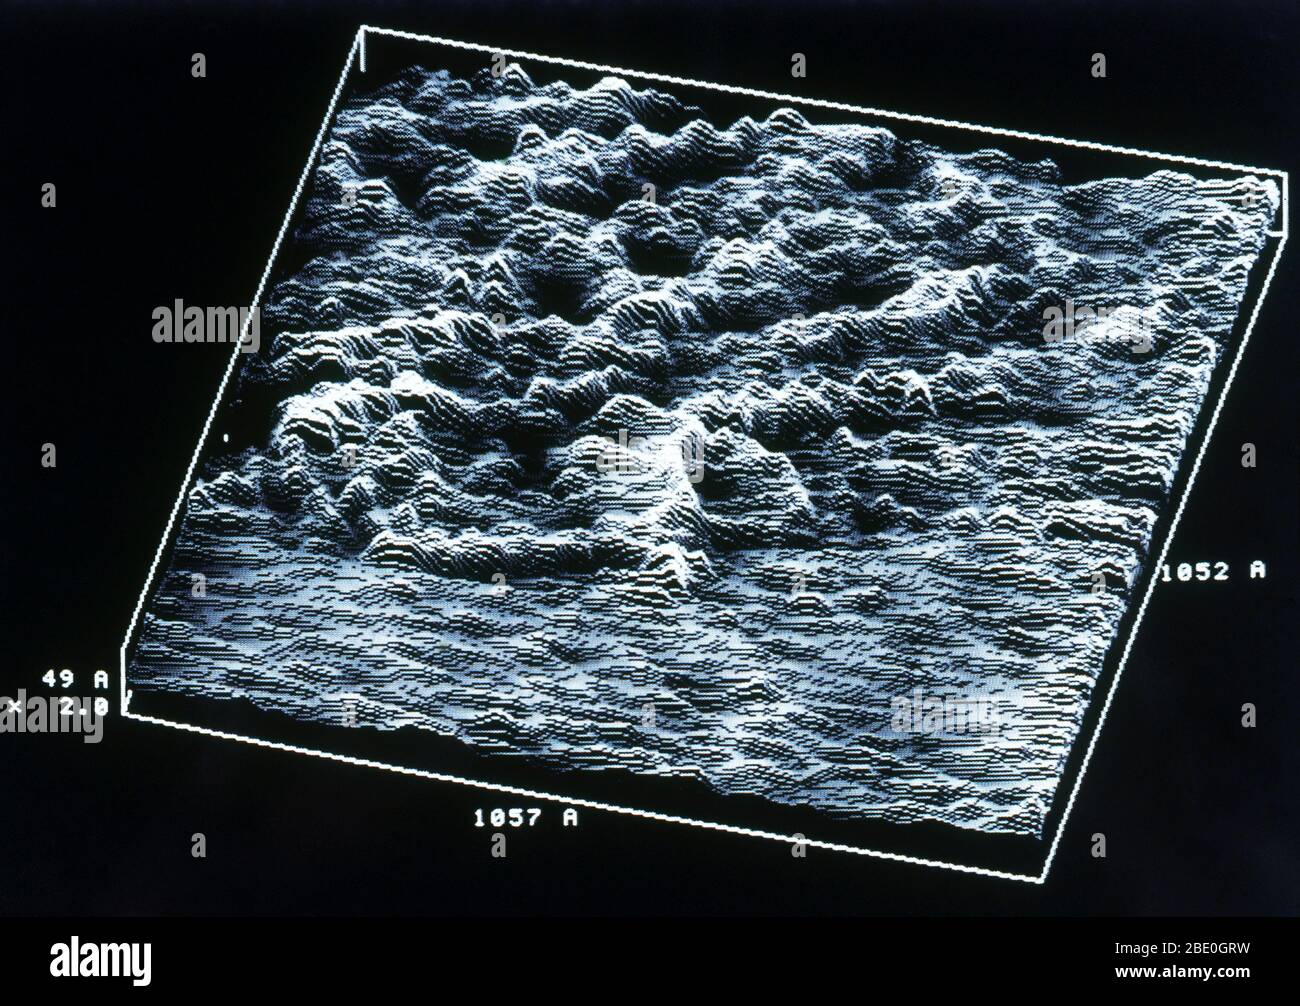 Uncoated double-stranded DNA imaged by a scanning tunneling microscope (STM). Stock Photo